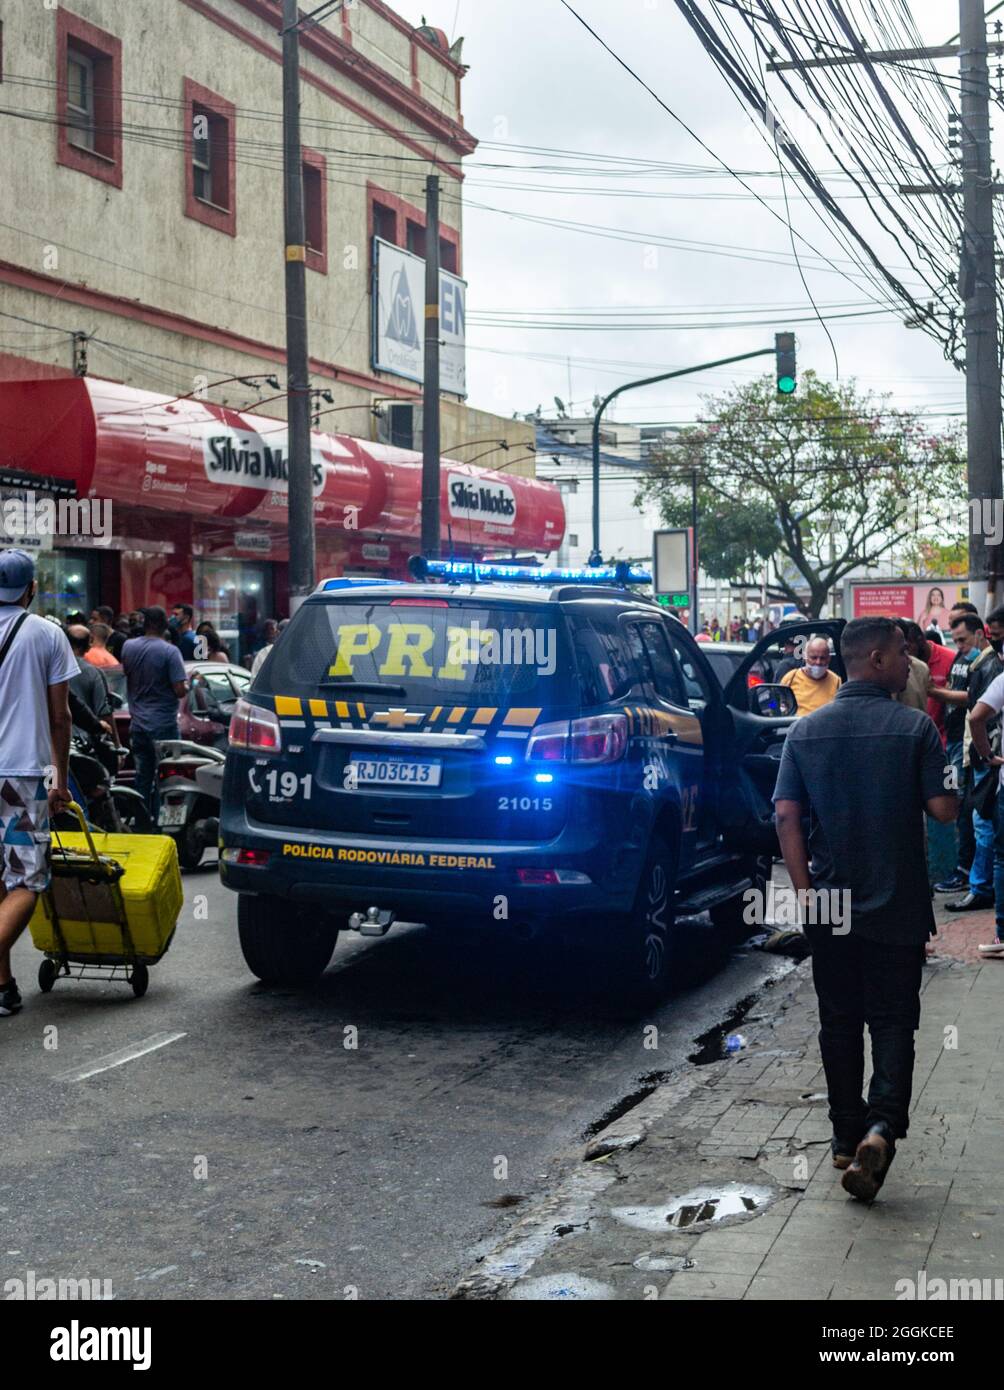 The 'Policia Rodoviaria Federal' or 'Federal Highway Police' (English) tries to stop an assault at gunpoint to a business in the market district in N Stock Photo